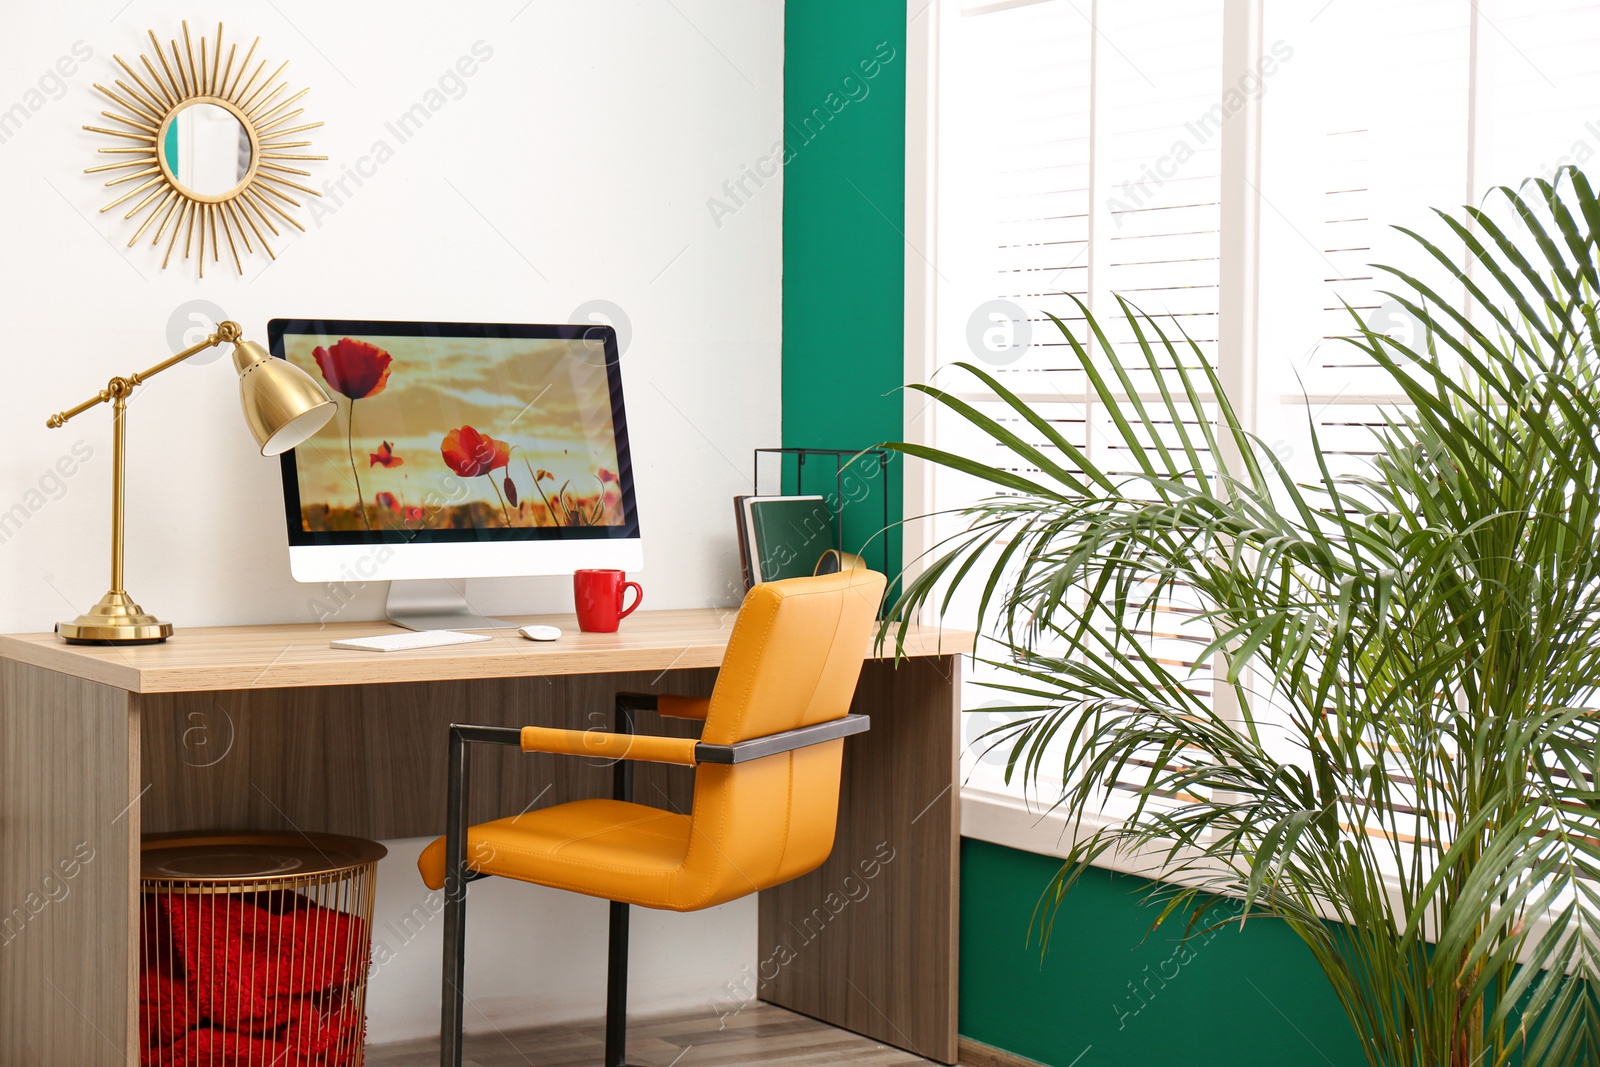 Photo of Comfortable workplace near window with white horizontal blinds in room